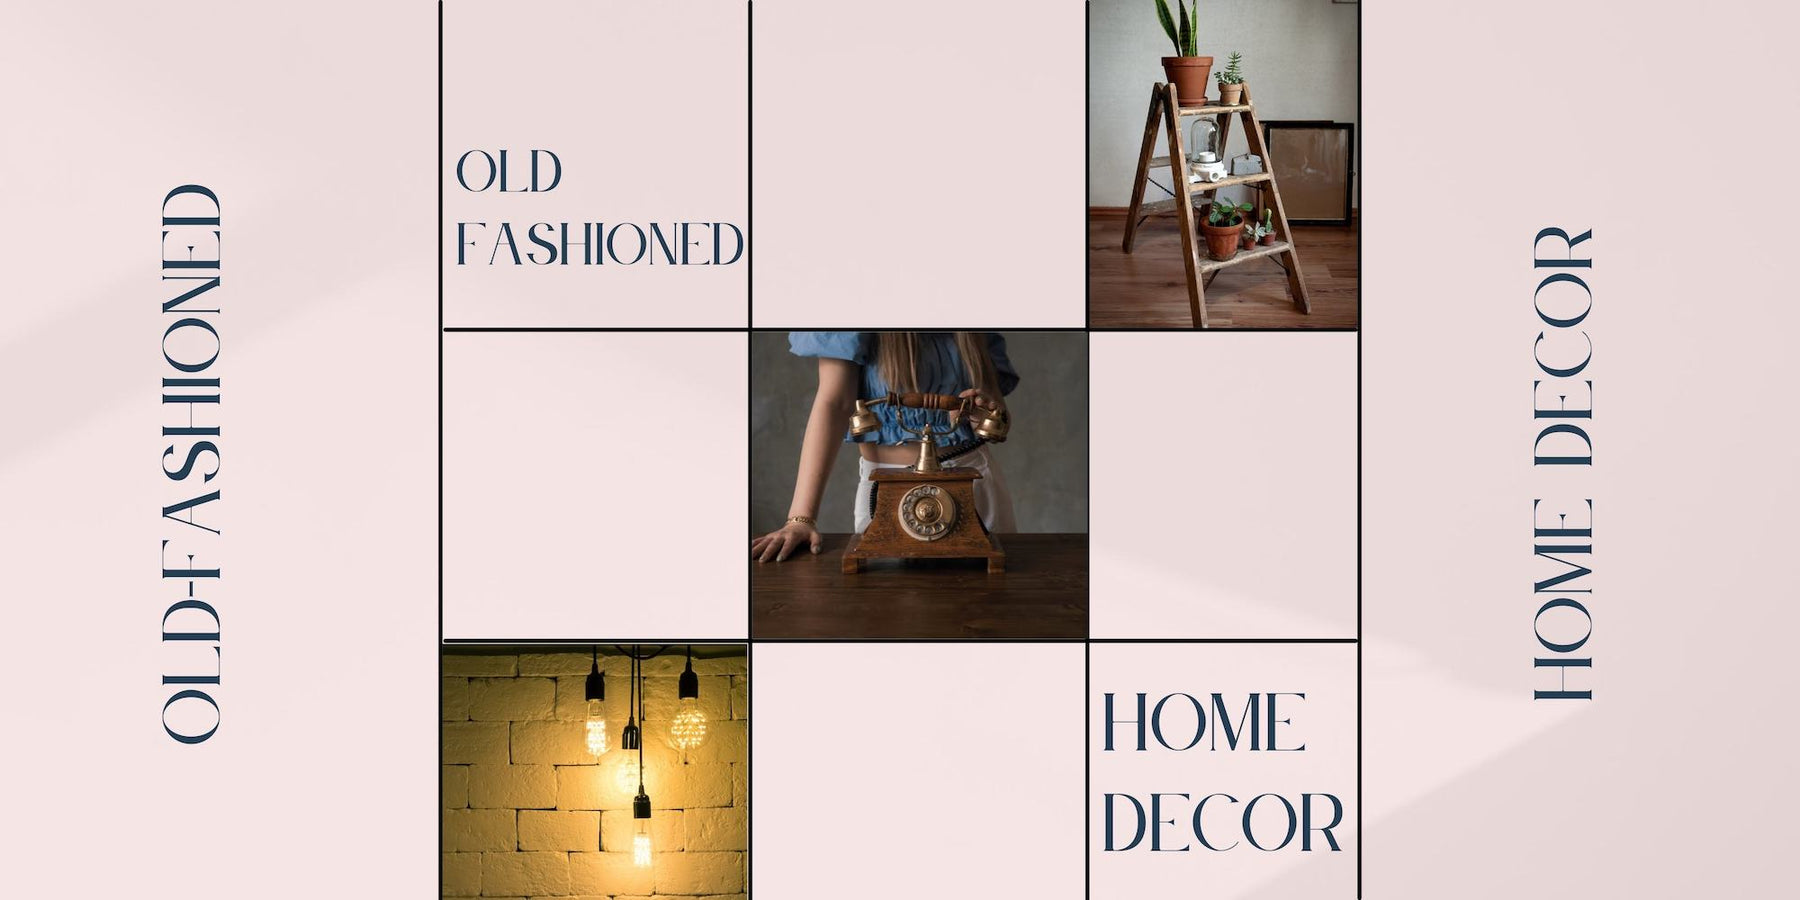 10 Old-Fashioned Decor Ideas for Your Home - The Handmade Store